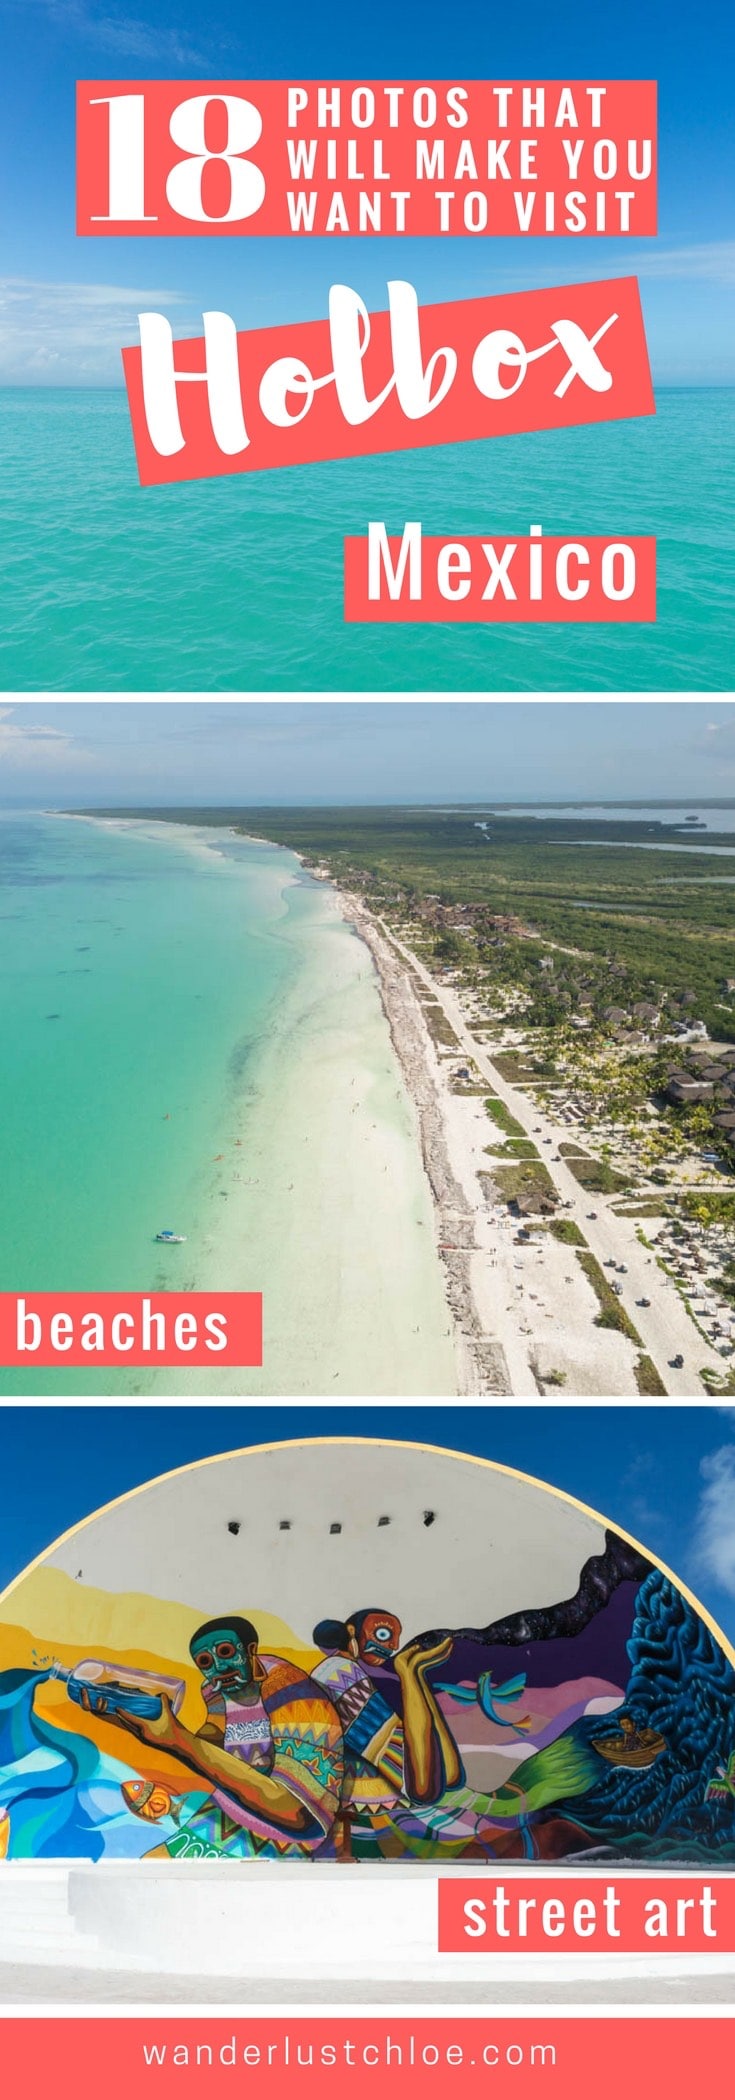 18 Photos That Will Make You Want To Visit Isla Holbox, Mexico